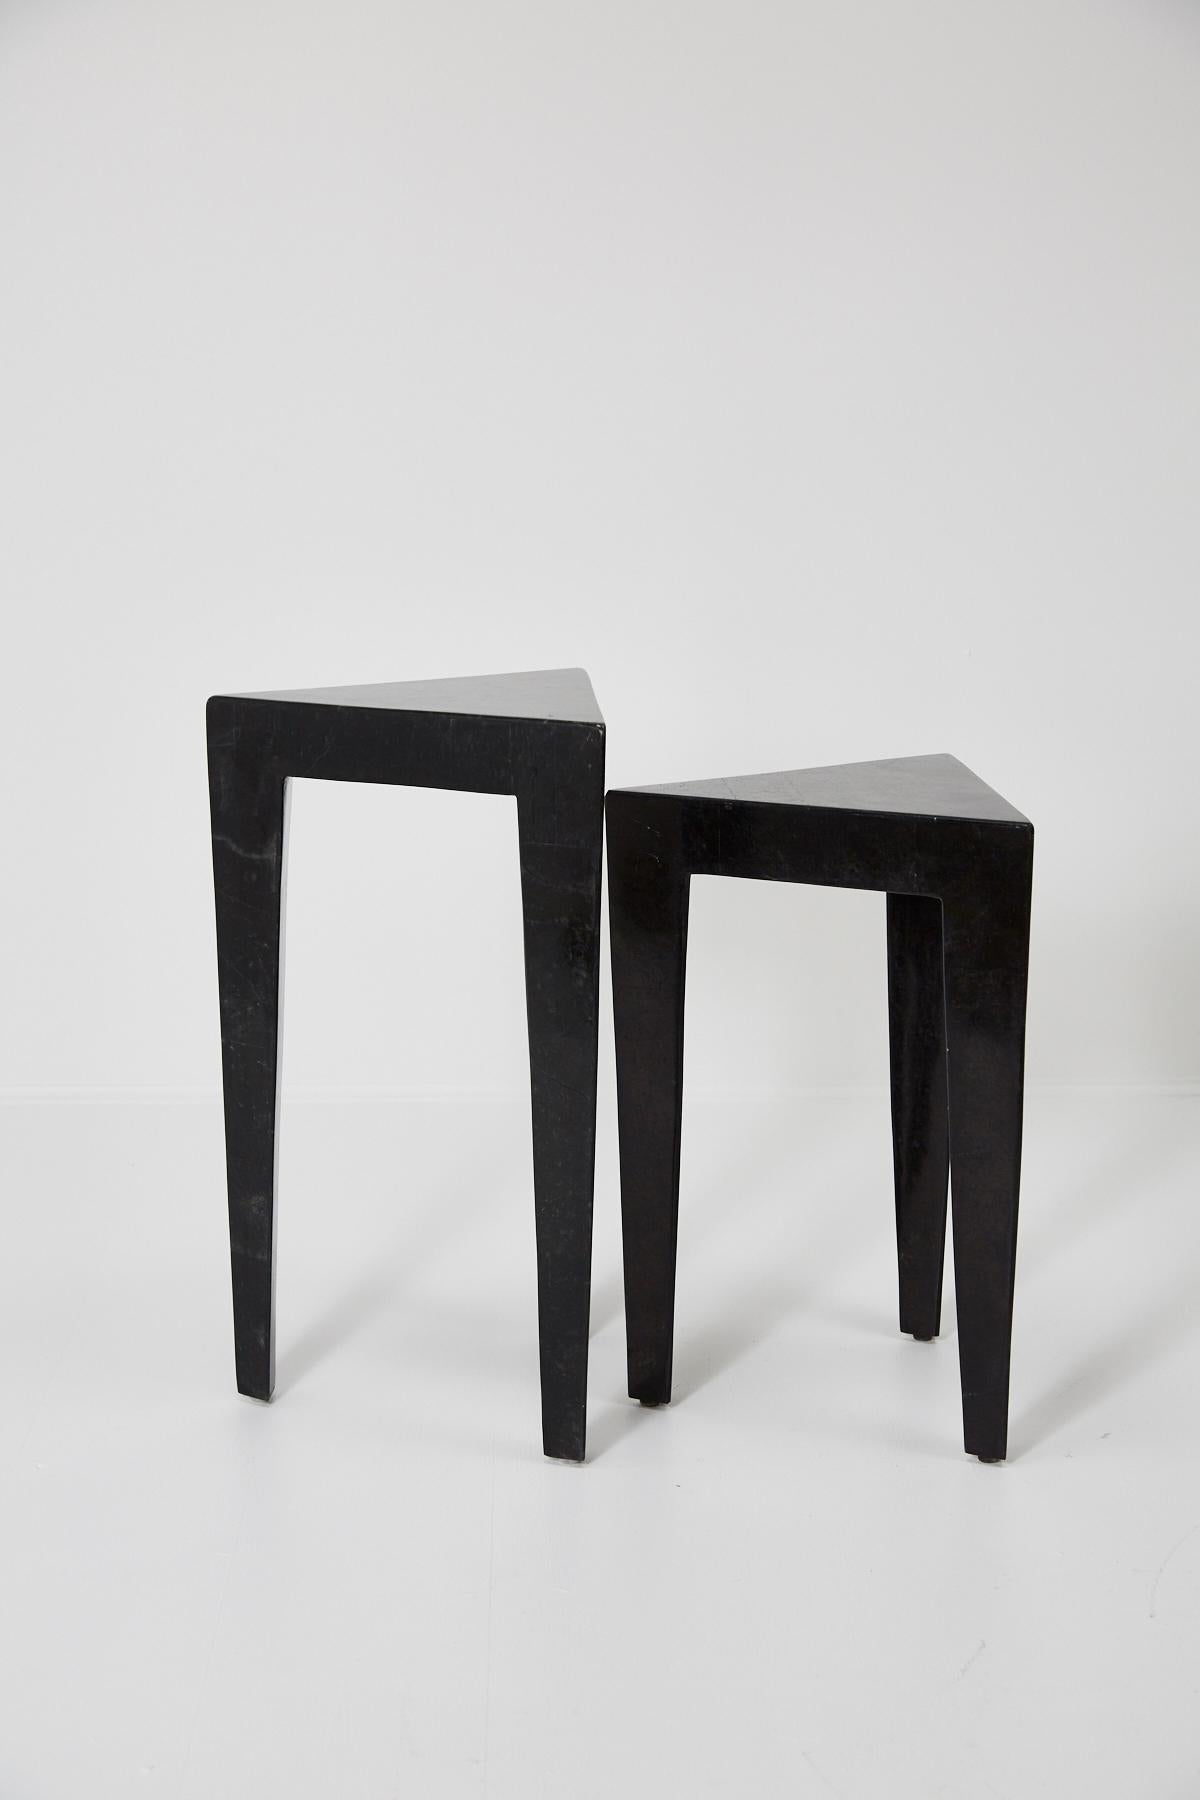 Philippine Black Tessellated Stone Triangular Nesting Tables, 1990s For Sale